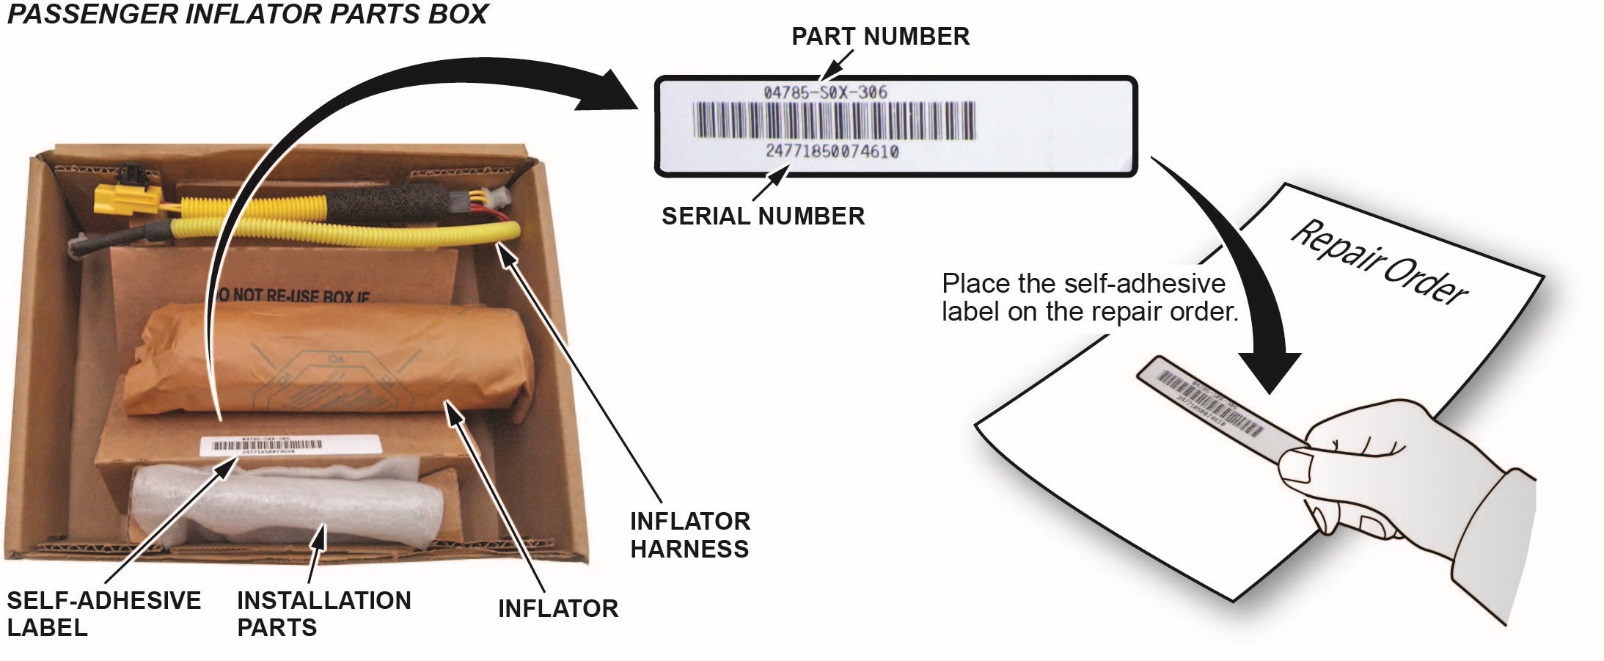 The replacement part number is printed on the top part of the label and the serial number is printed on the bottom